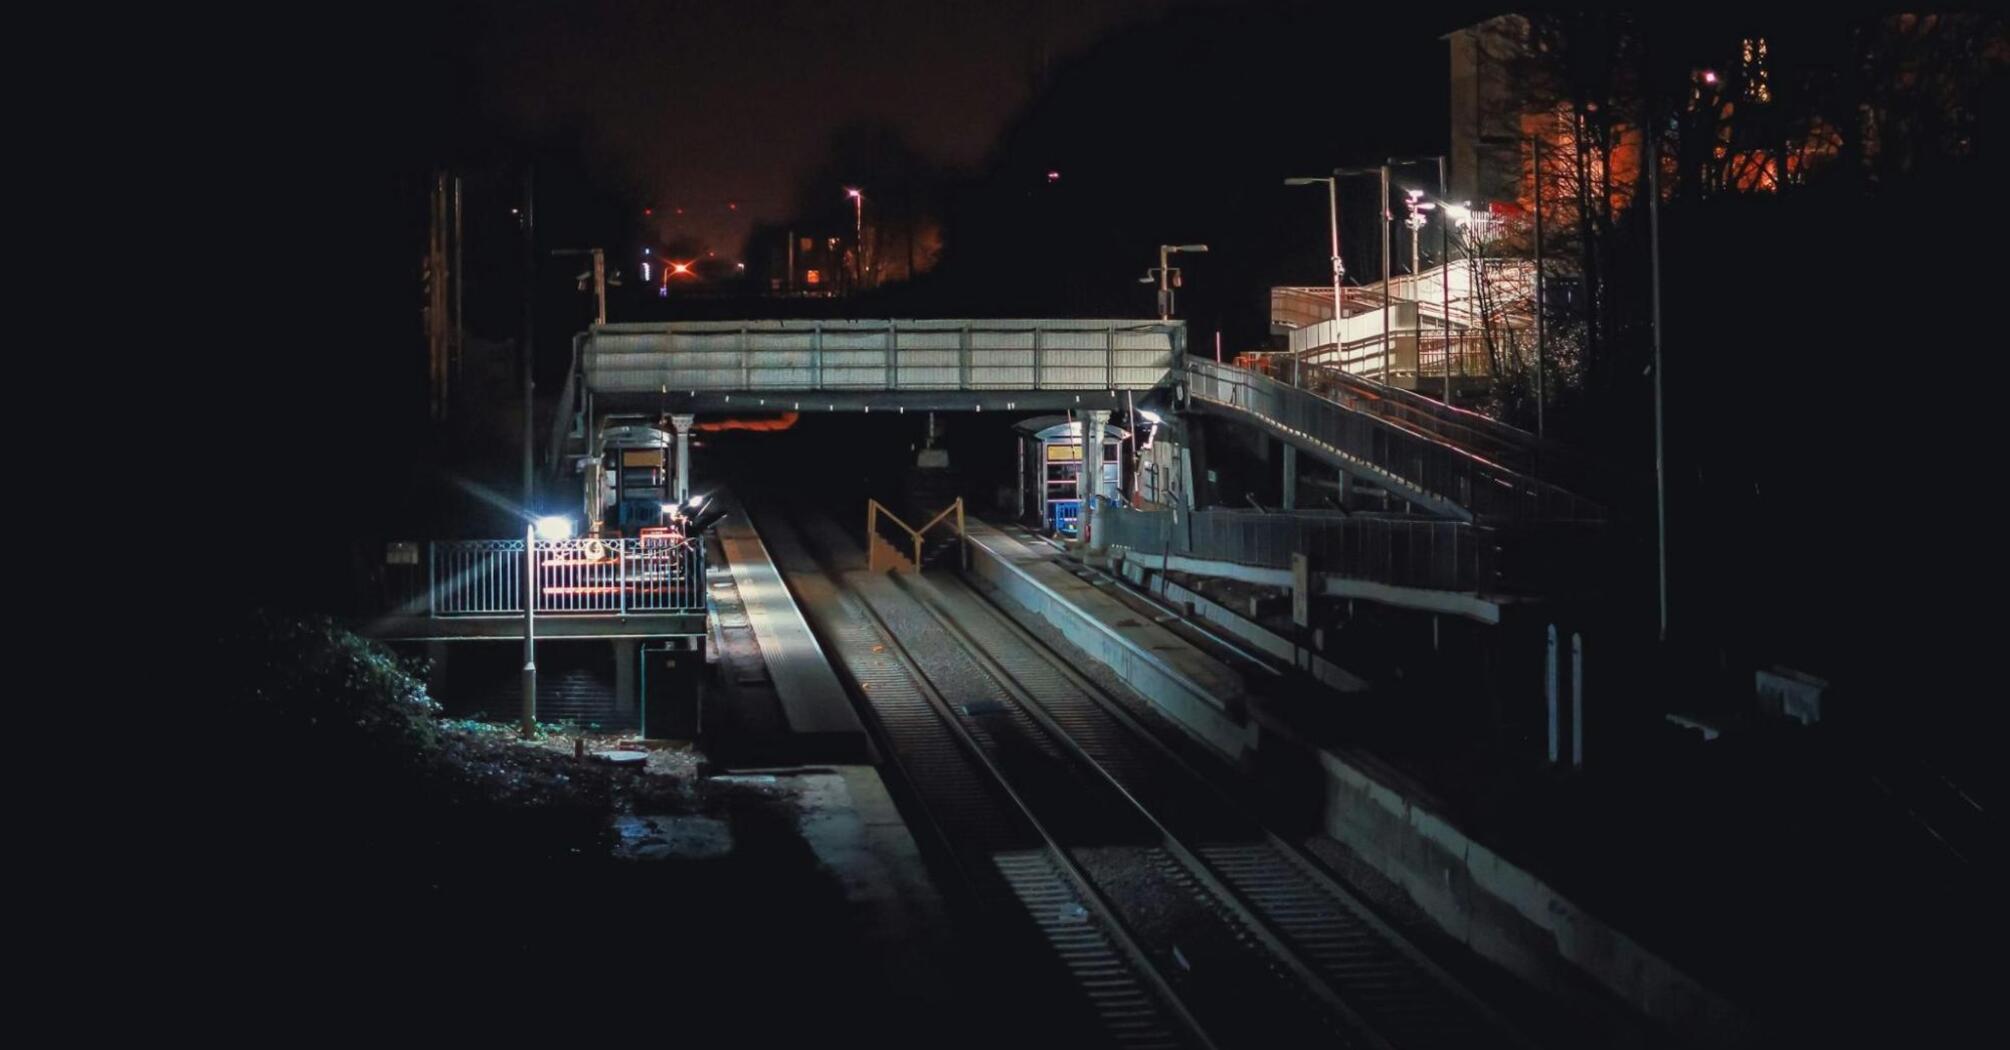 A quiet railway station at night with ongoing construction work